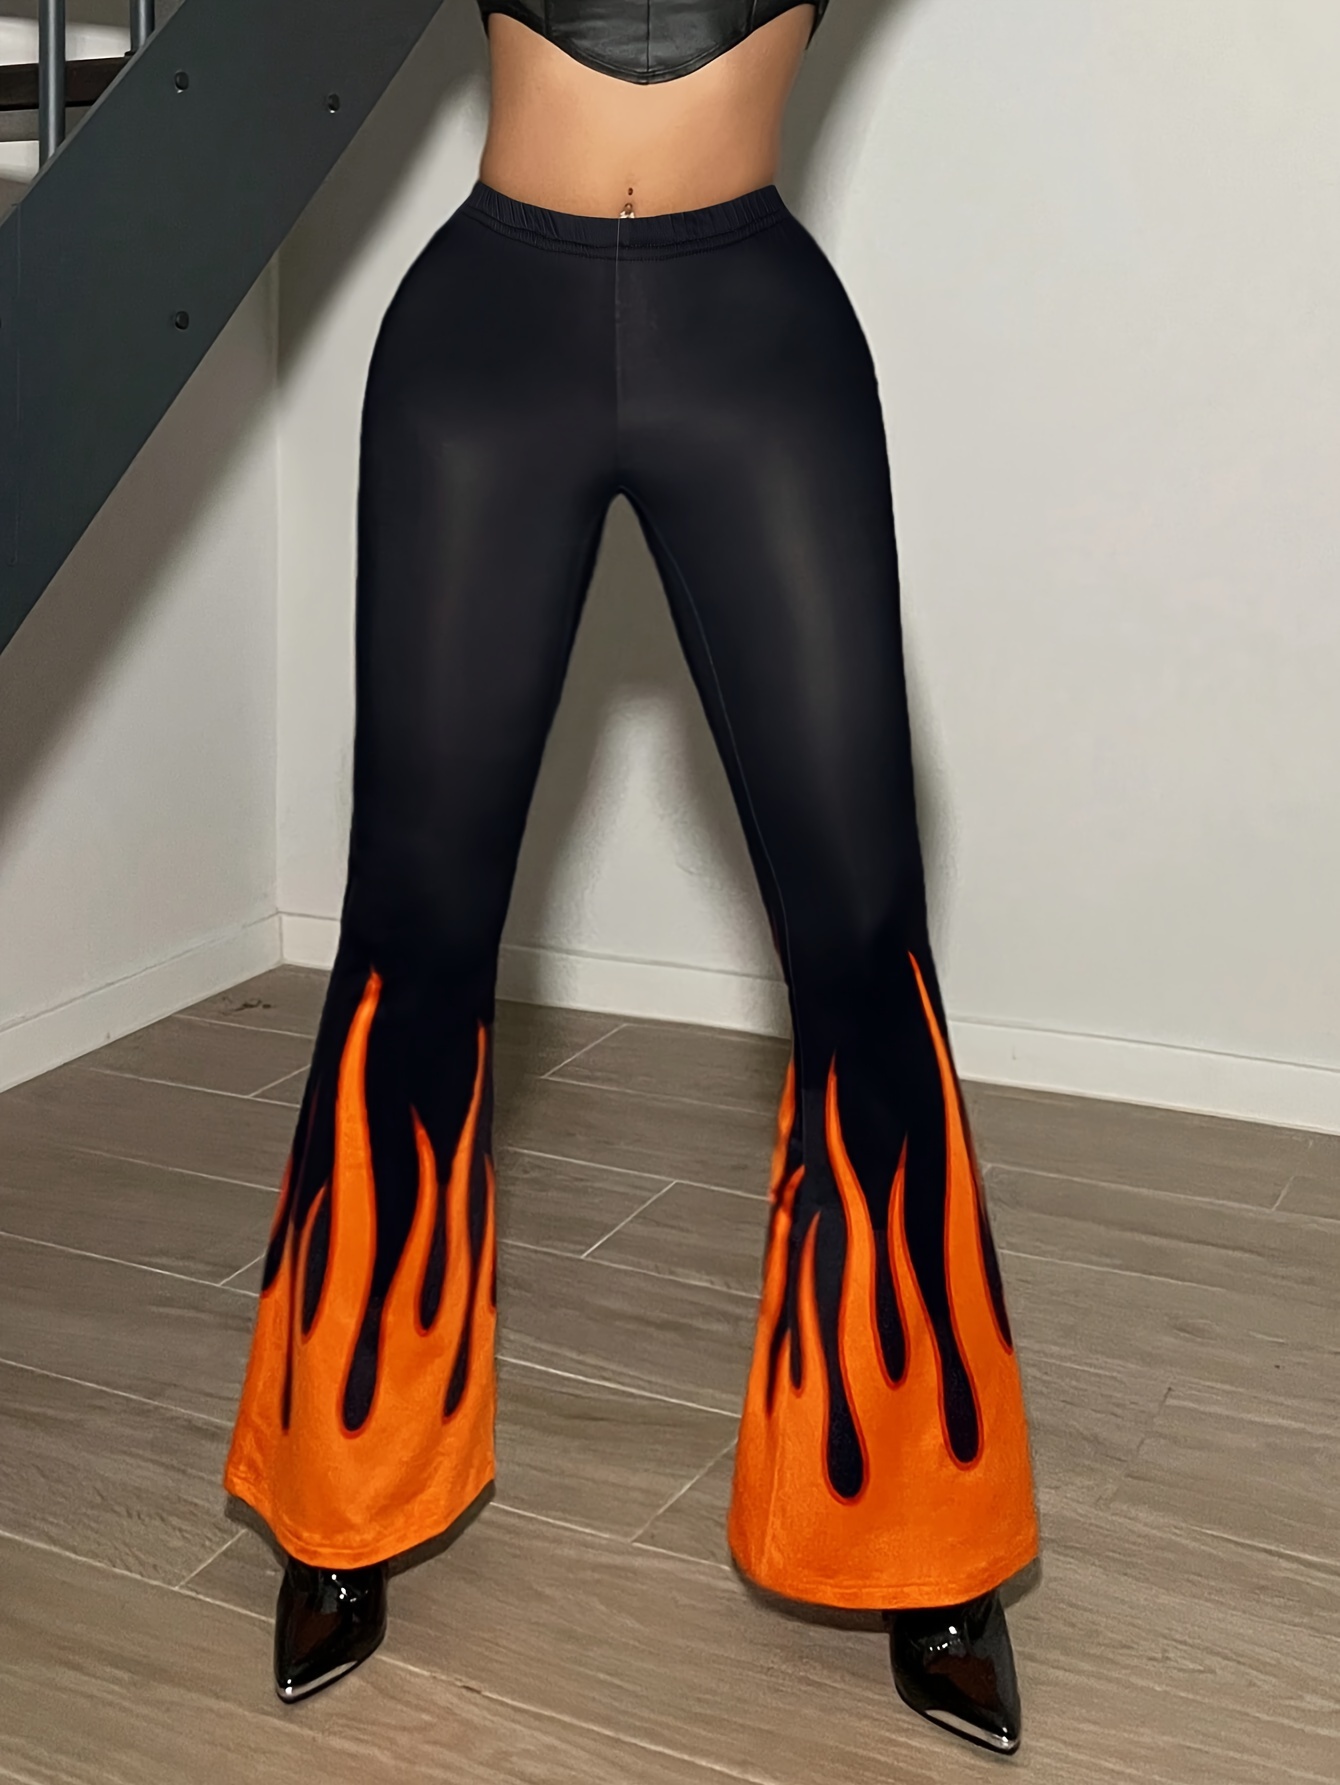 Plus Size Casual 3D Printed Yoga Pants Women Graphic Flare